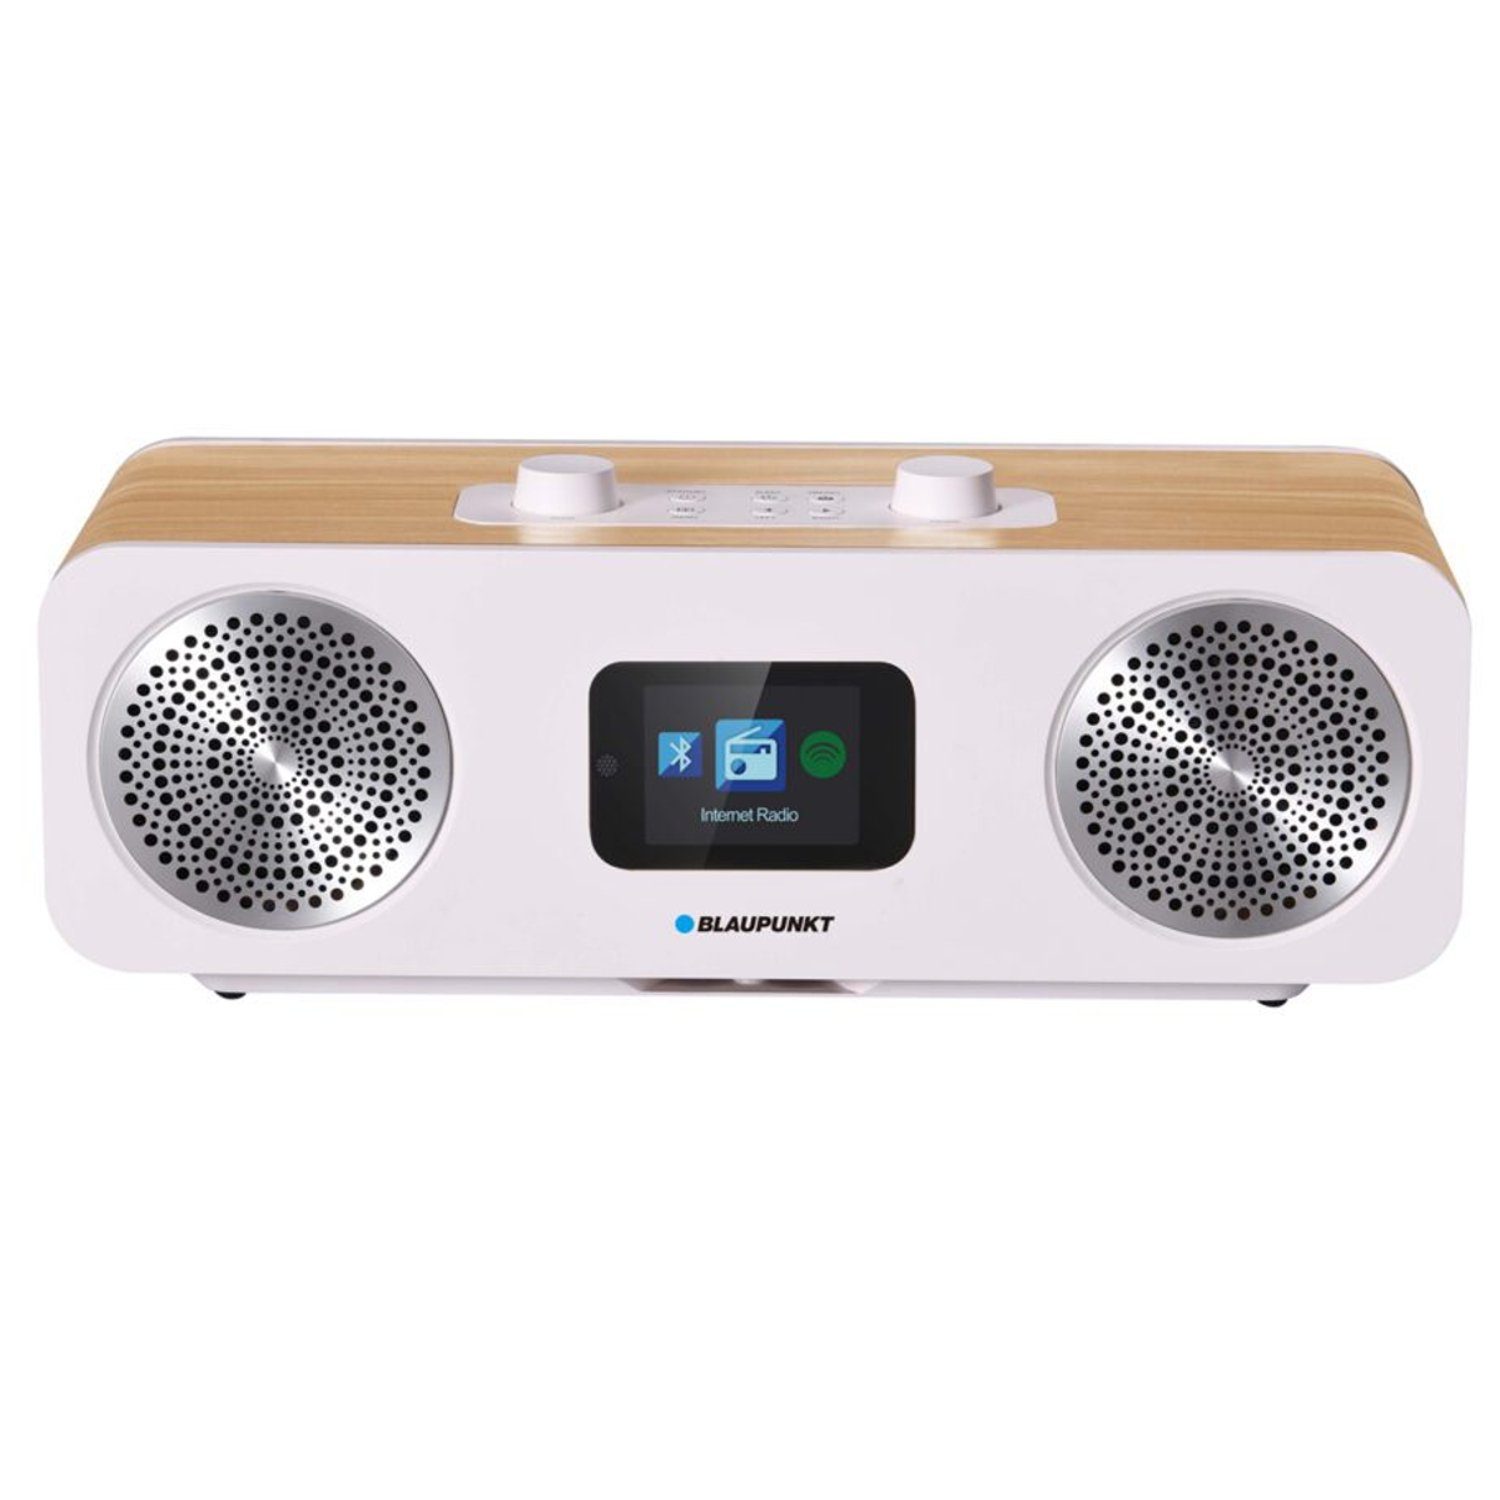 IR50DAB Digitalradio (DAB) (Digitalradio (DAB), FM-Tuner mit RDS, 20,00 W, Bluetooth-Audio-Streaming, USB-Player, Spotify-Connect, Universal Plug&Play, Mobil-App inkl. Fernbedienung)